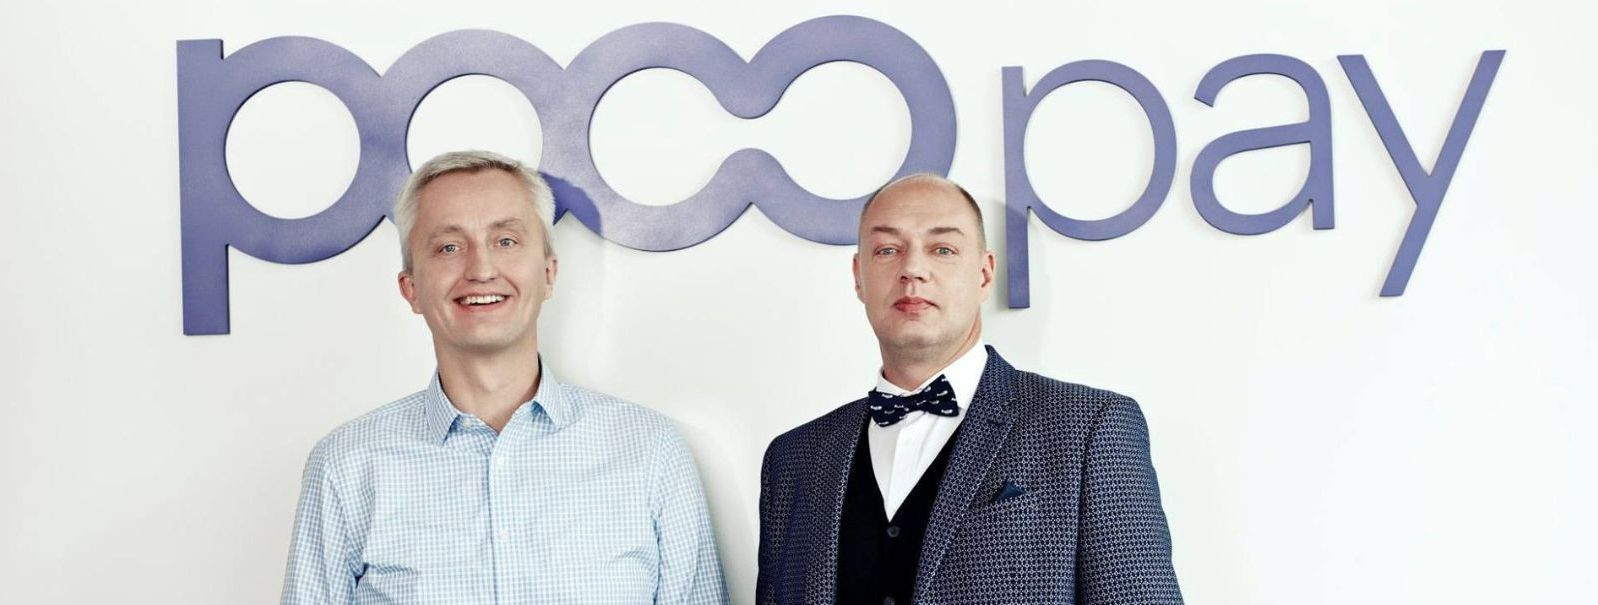 Pocopay is an innovative mobile application providing users across Europe with quick and convenient access to everyday banking services. Our goal is to breathe new life into everyday banking by combining the convenience of ...